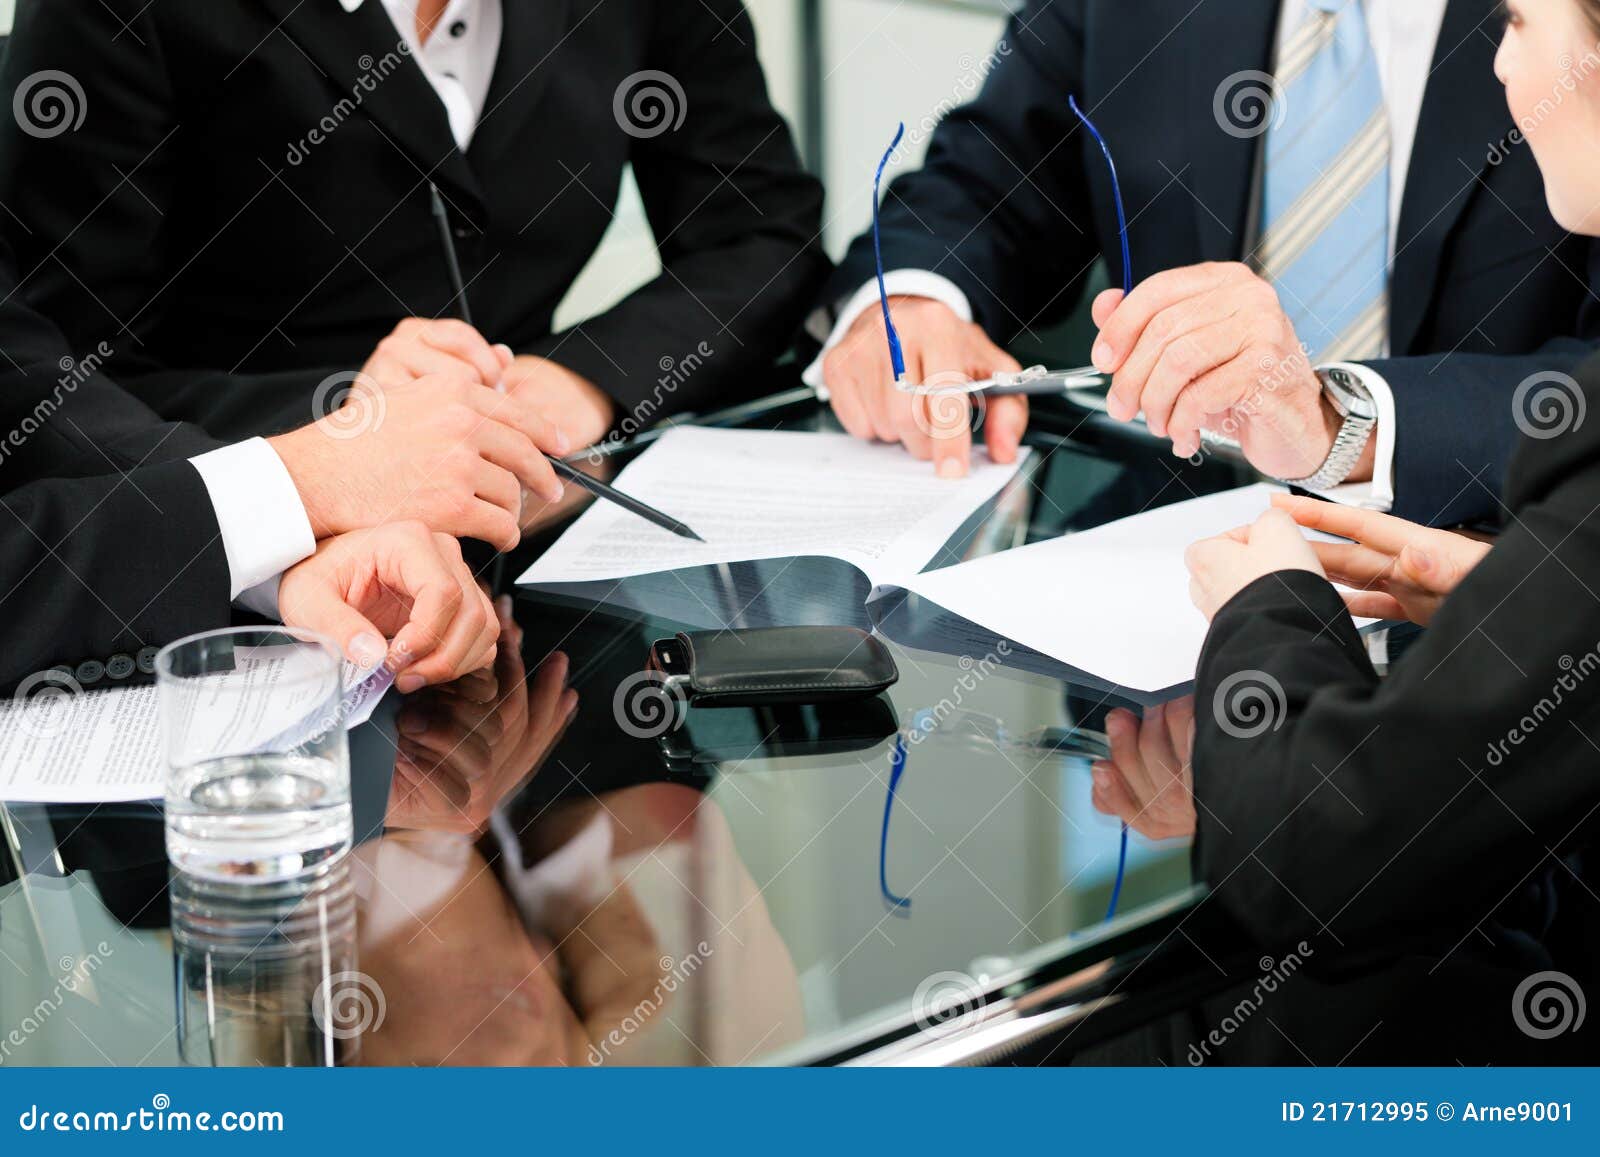 business meeting with work on contract